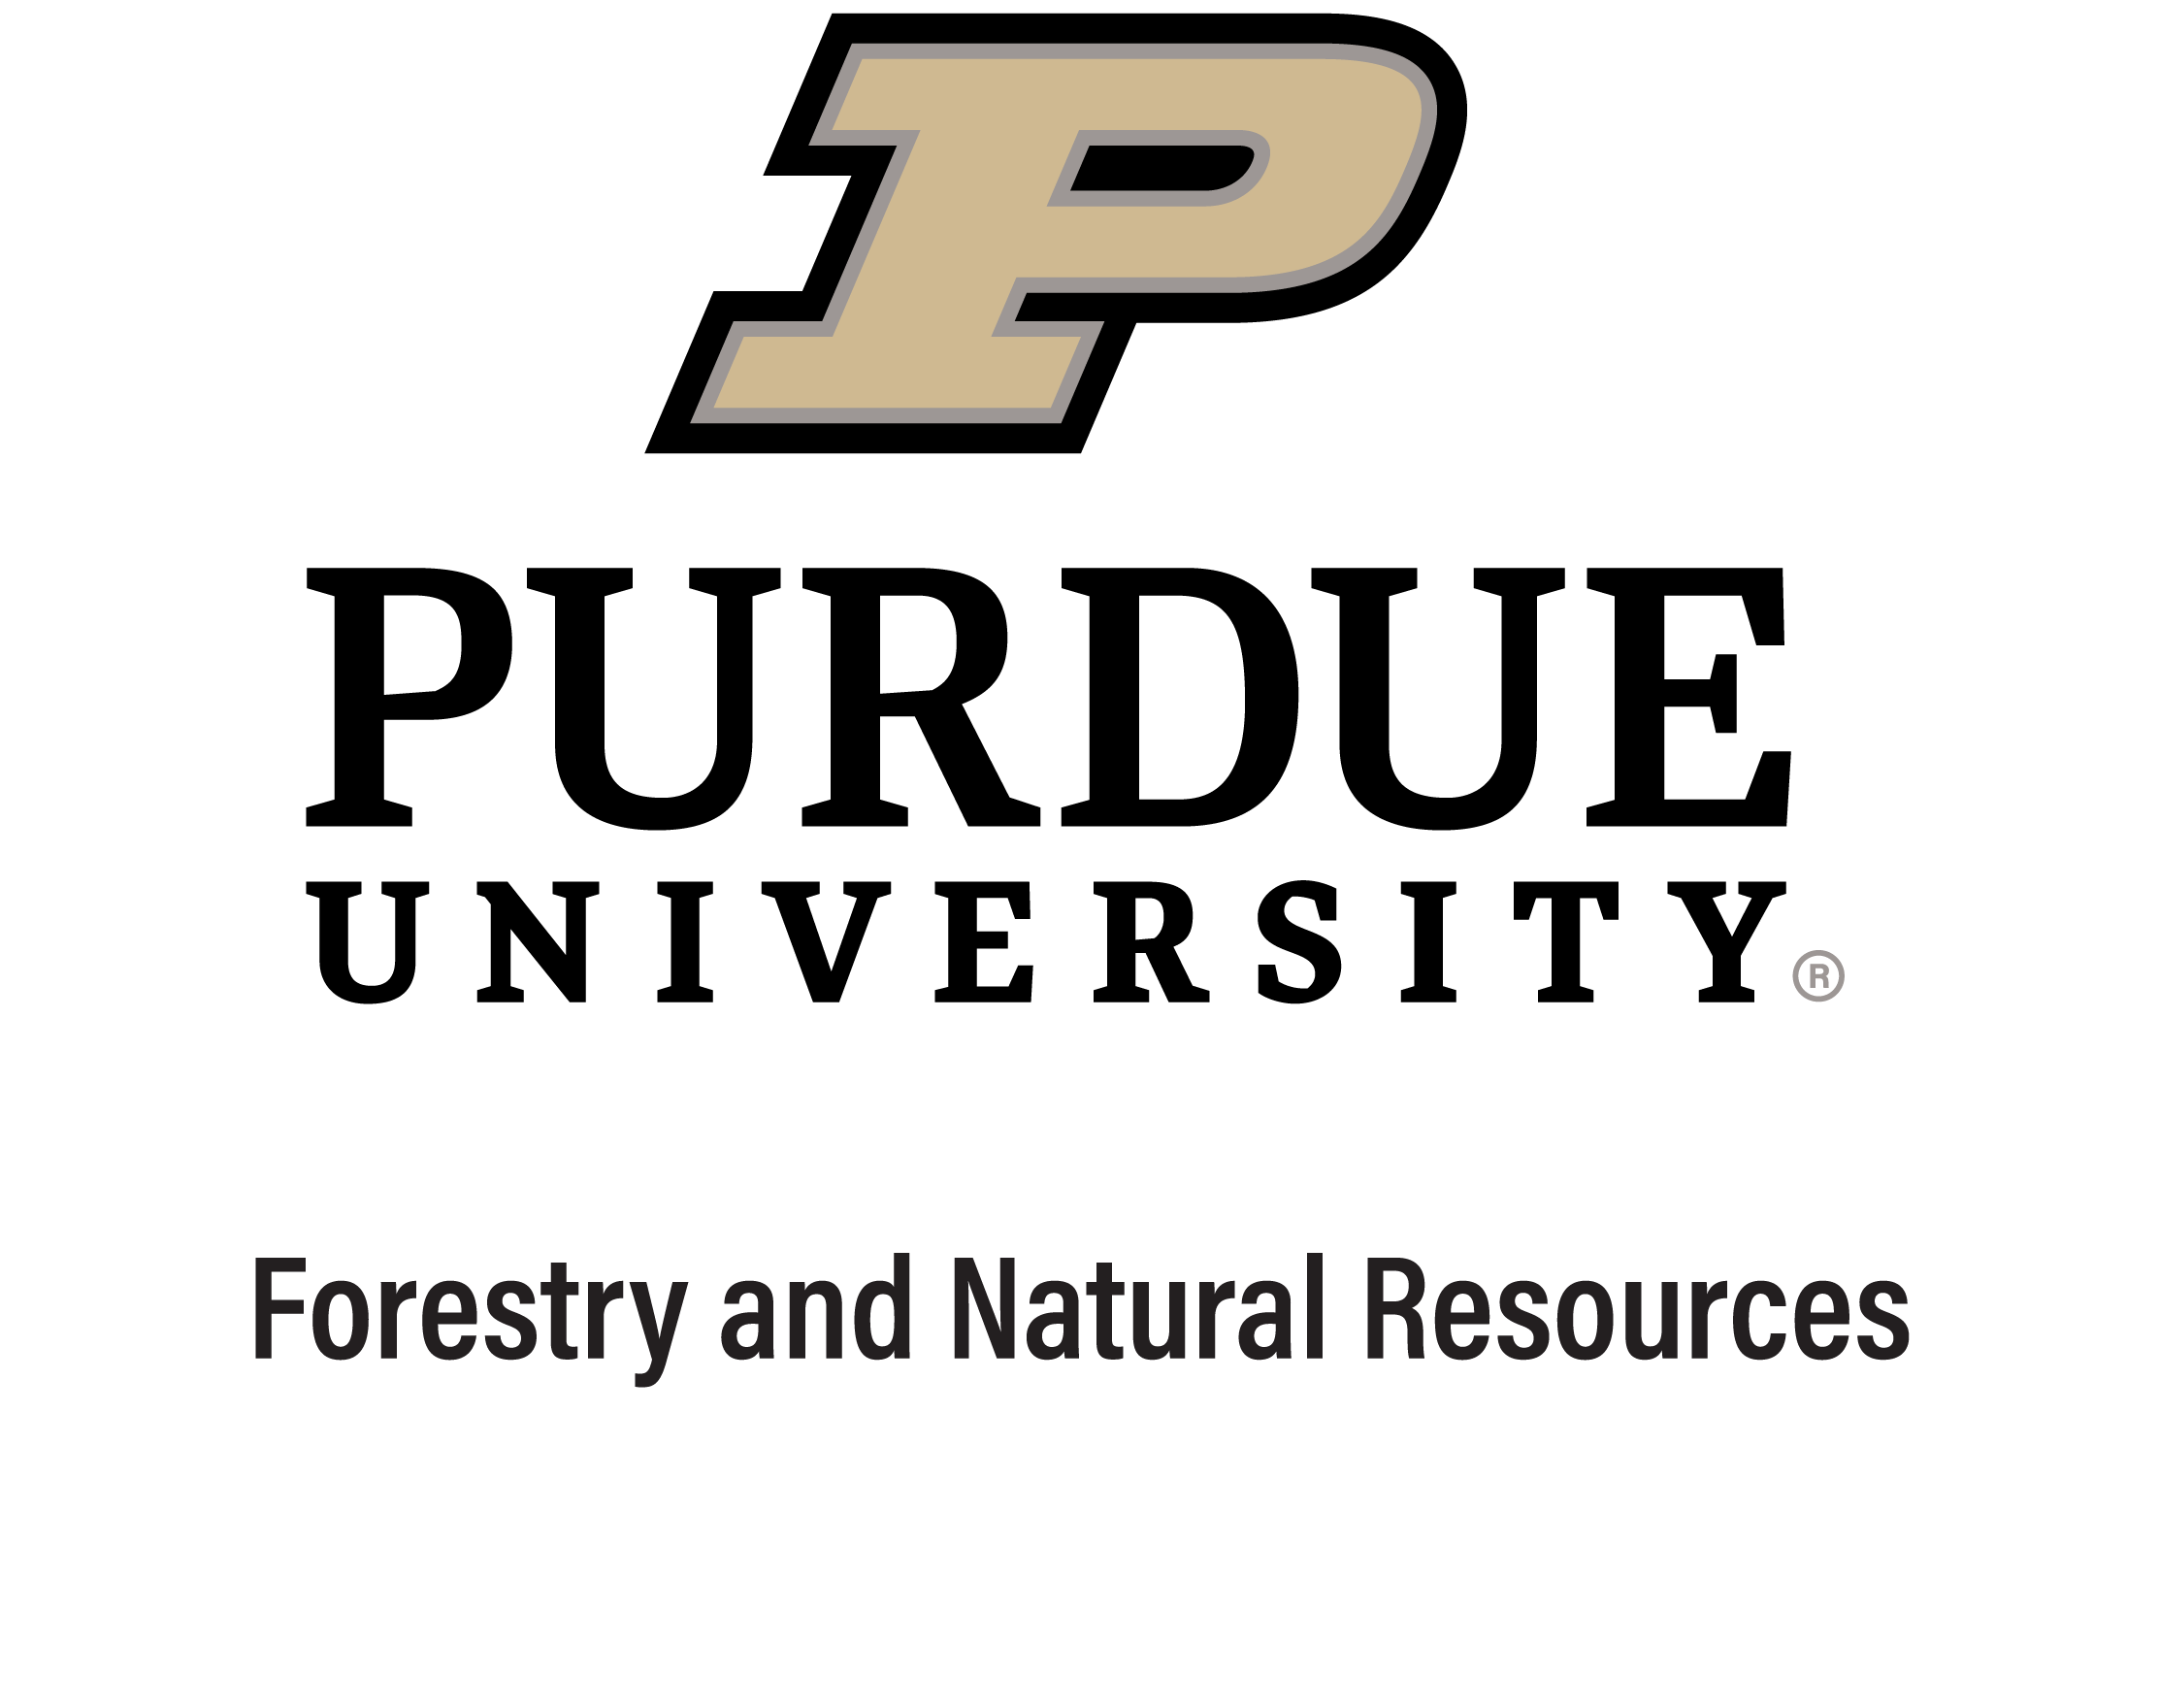 Purdue Forestry and Natural Resources branding